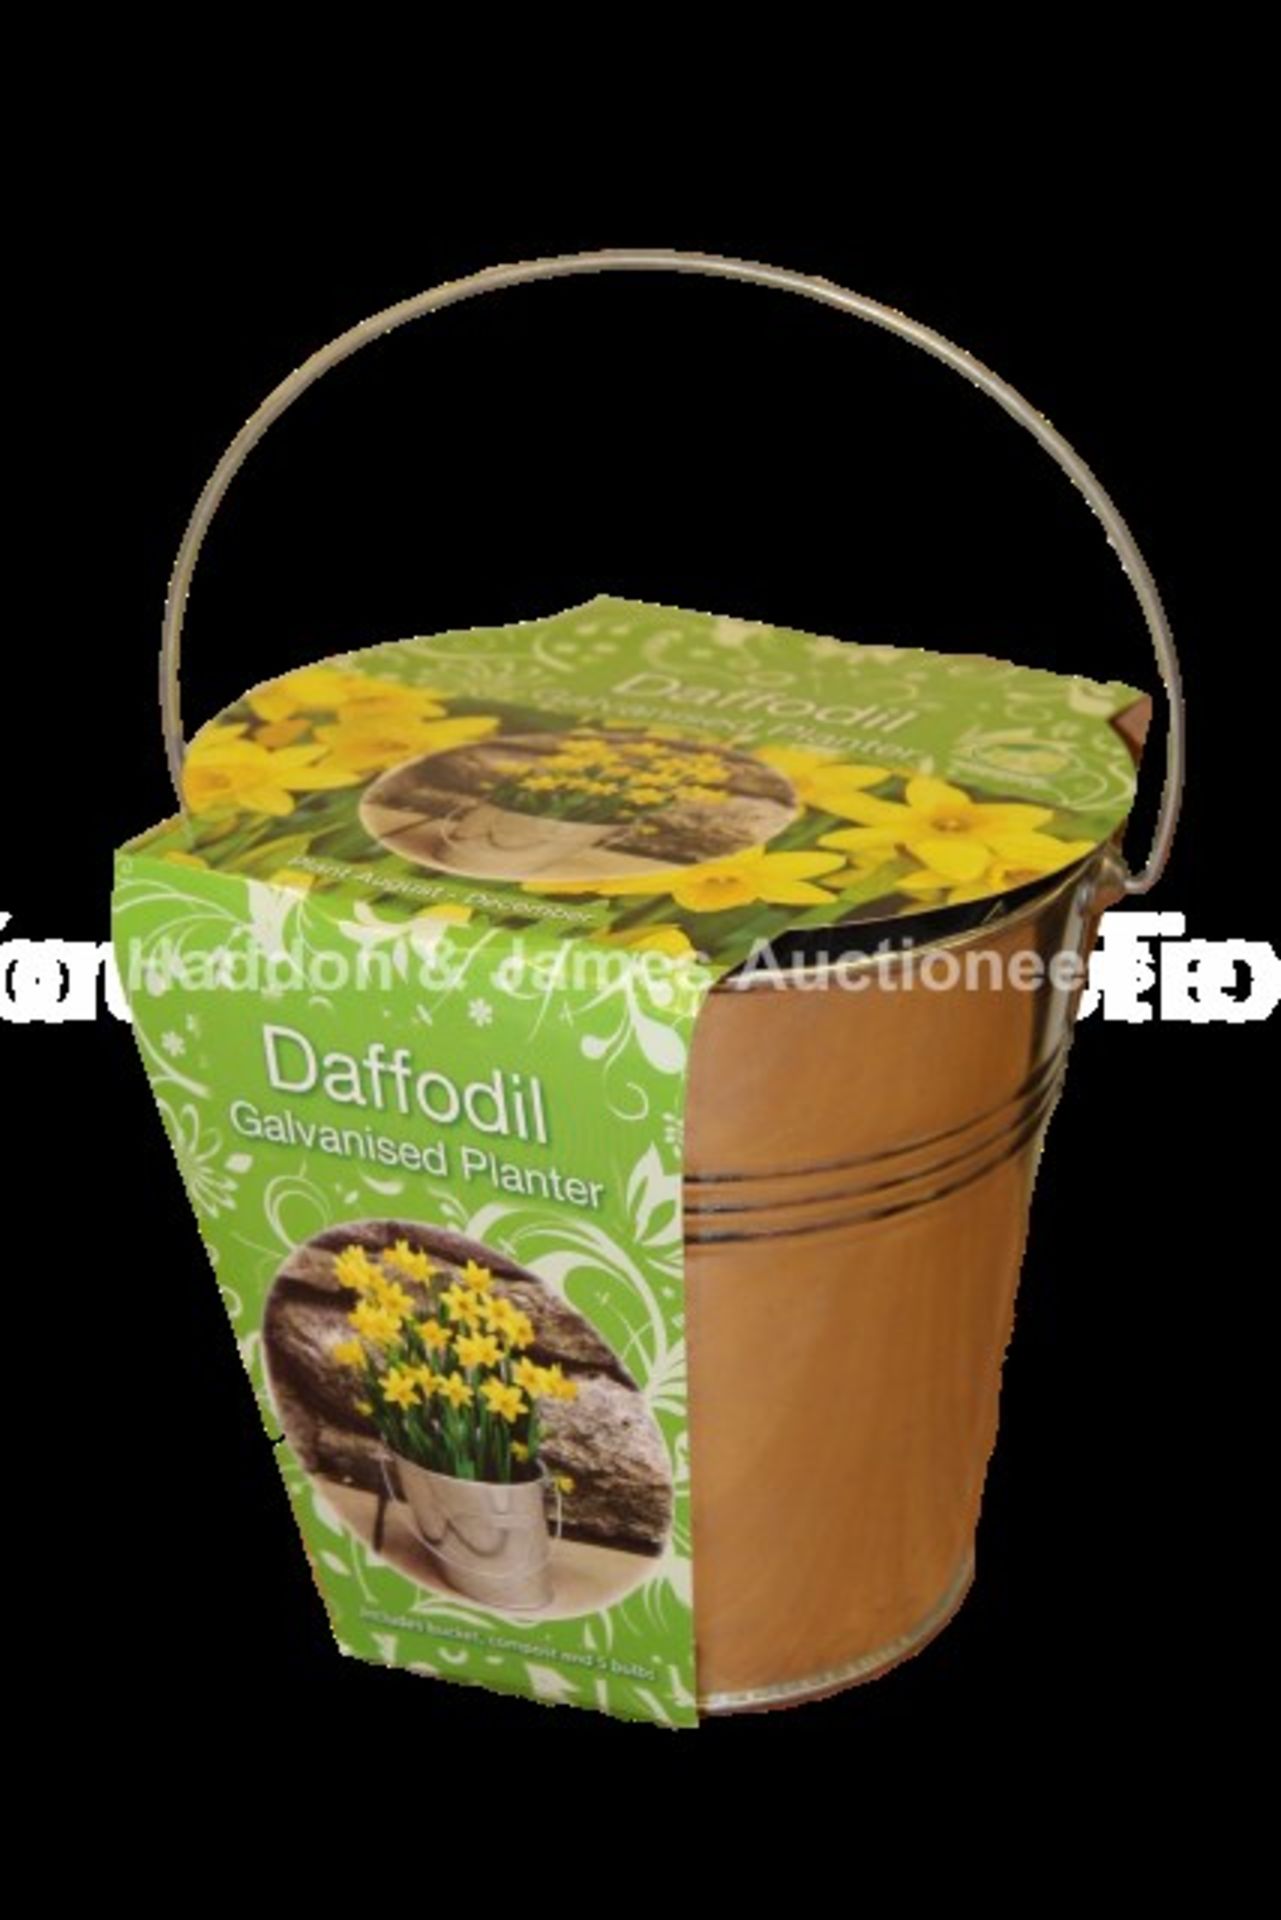 V *TRADE QTY* Brand New Daffodil 5 Bulb Galvanised Bucket Gift Set Including 5 Bulbs, Bucket Planter - Image 2 of 2